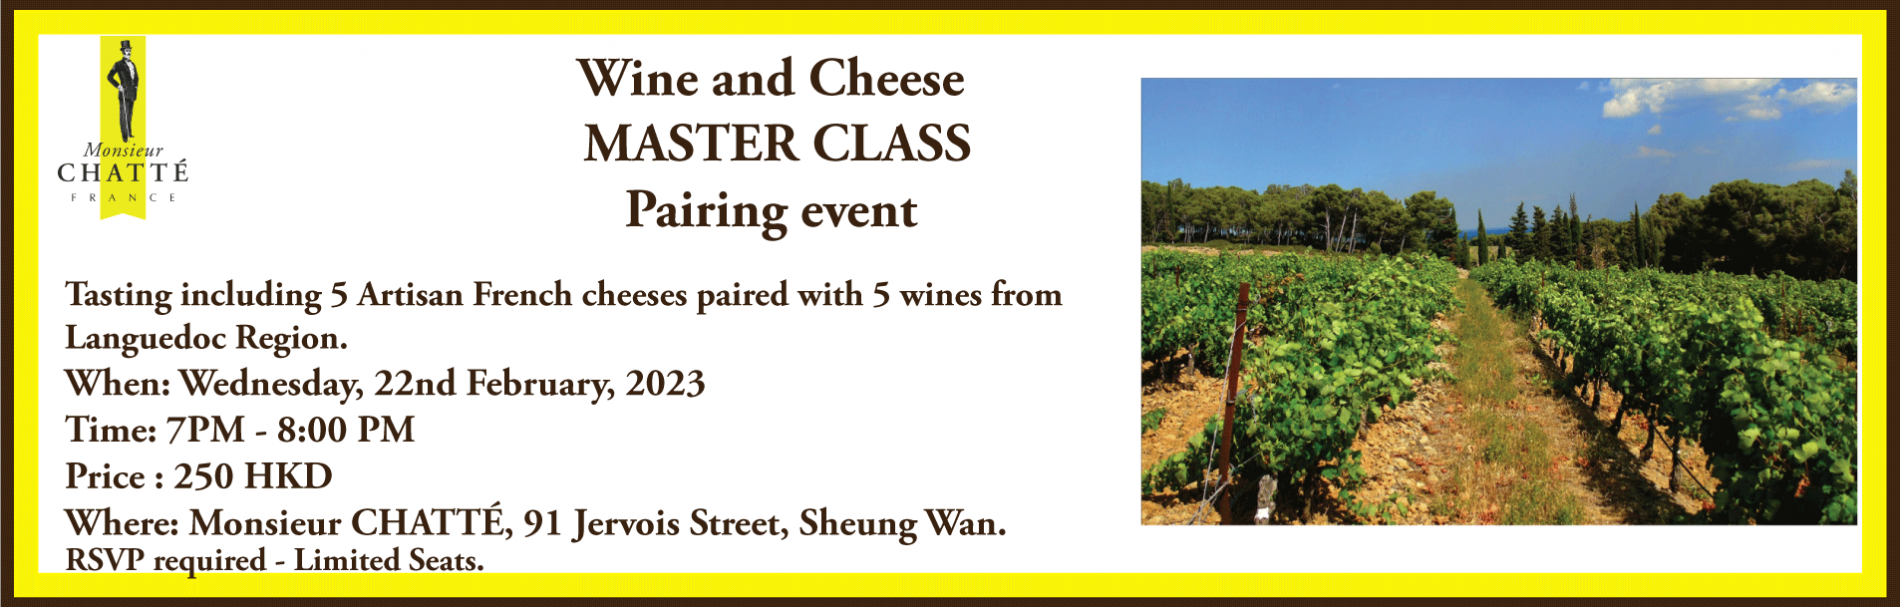 WINE AND CHEESE MASTERCLASS - LANGUEDOC REGION